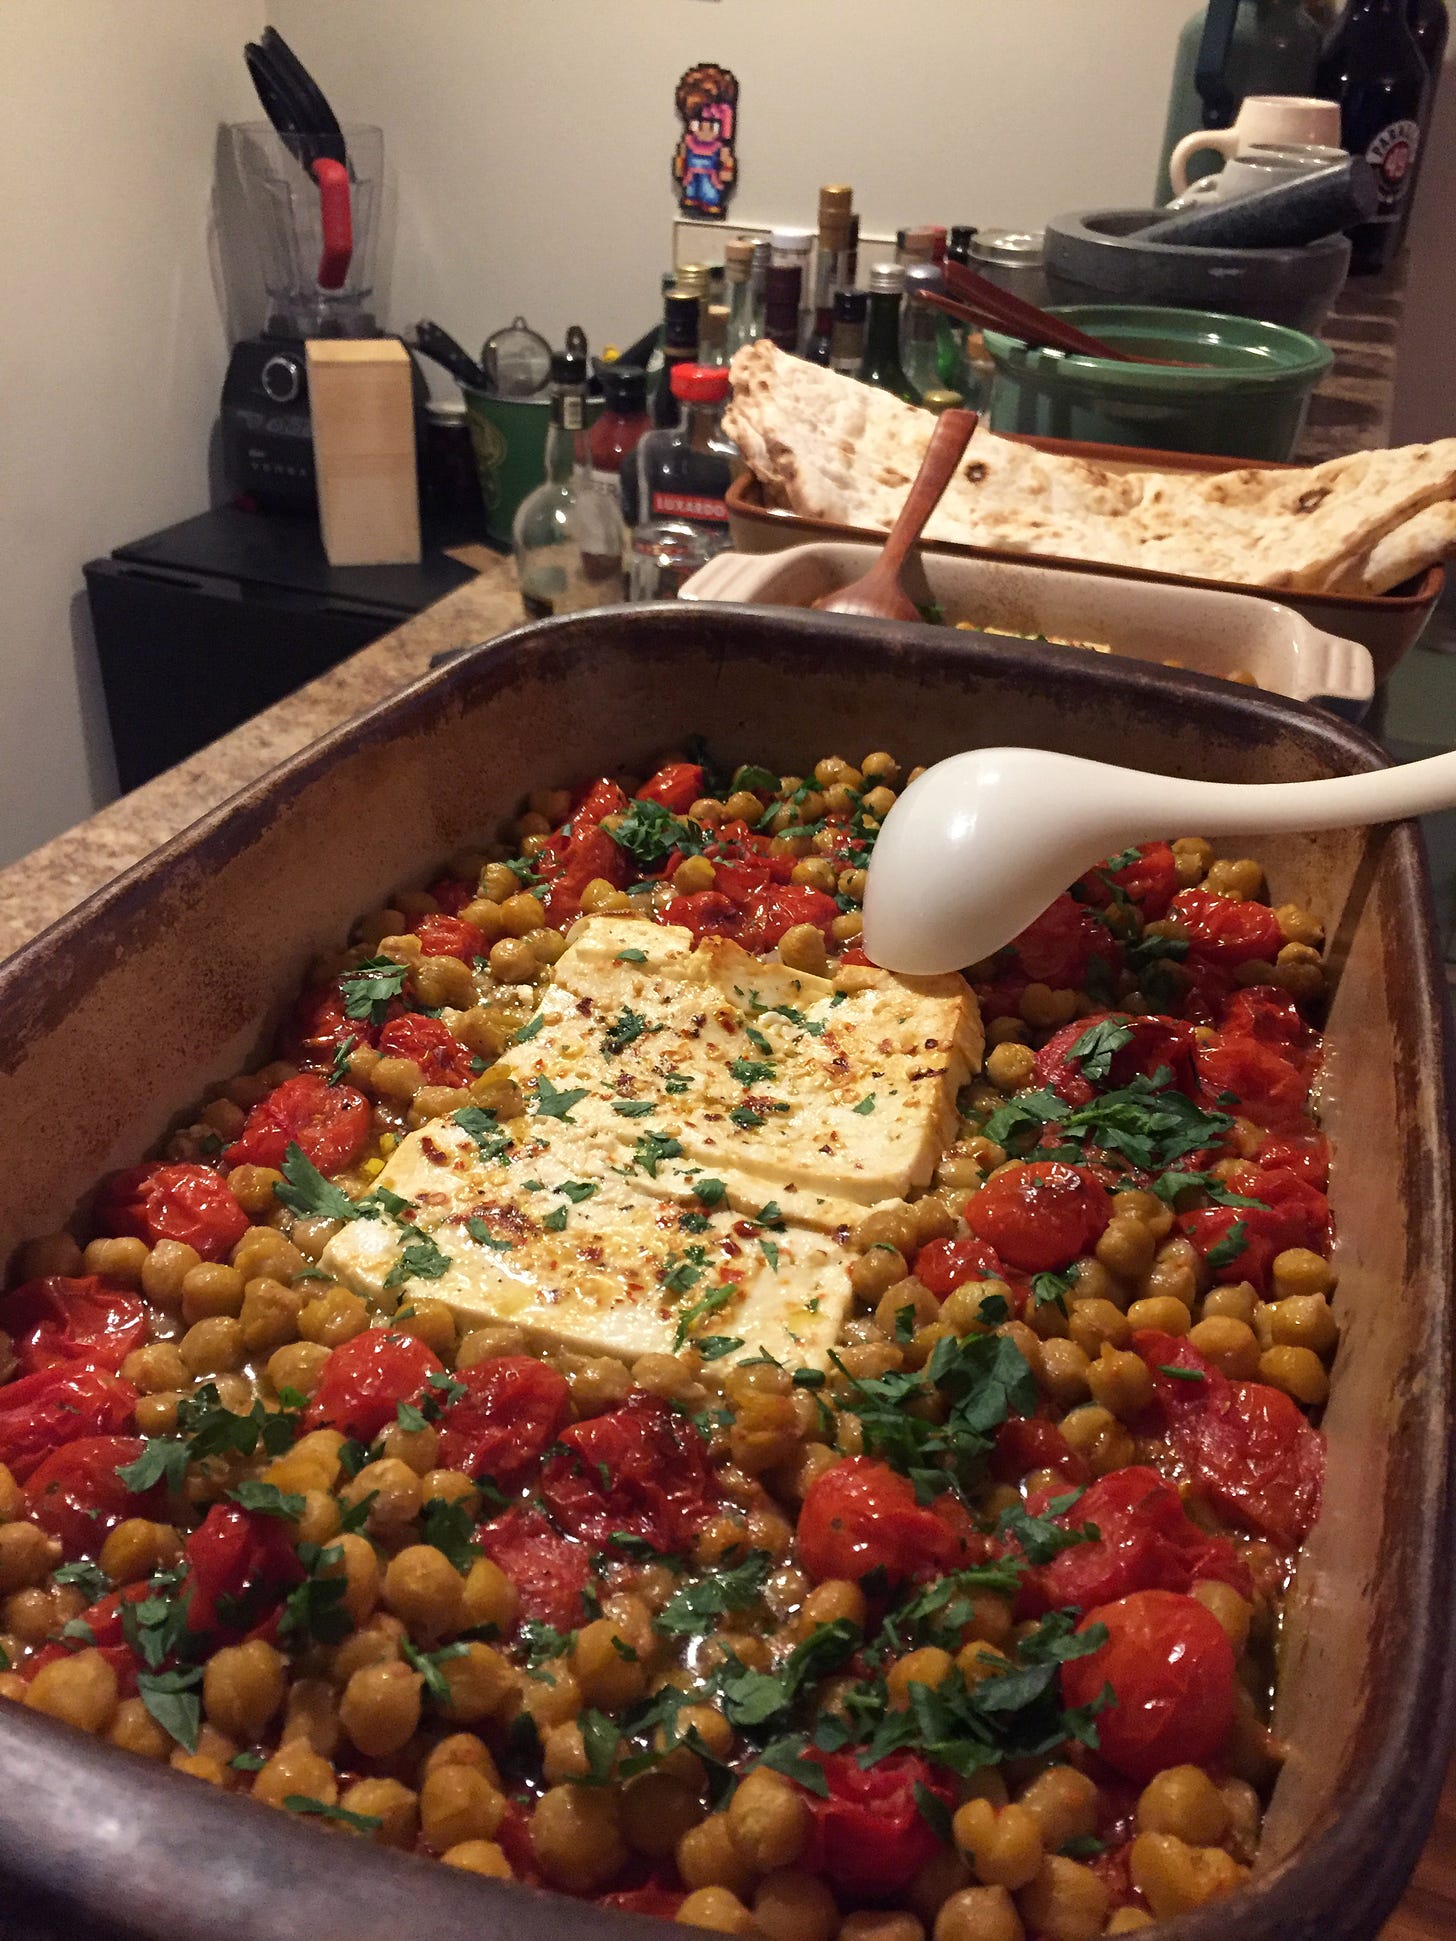 A large stoneware dish filled with the baked chickpeas, feta, and tomatoes, sprinkled with herbs and chili flakes. Behind the dish is a smaller baking dish with the tofu version, a plate of taftoon, and a green ceramic bowl containing the salad.